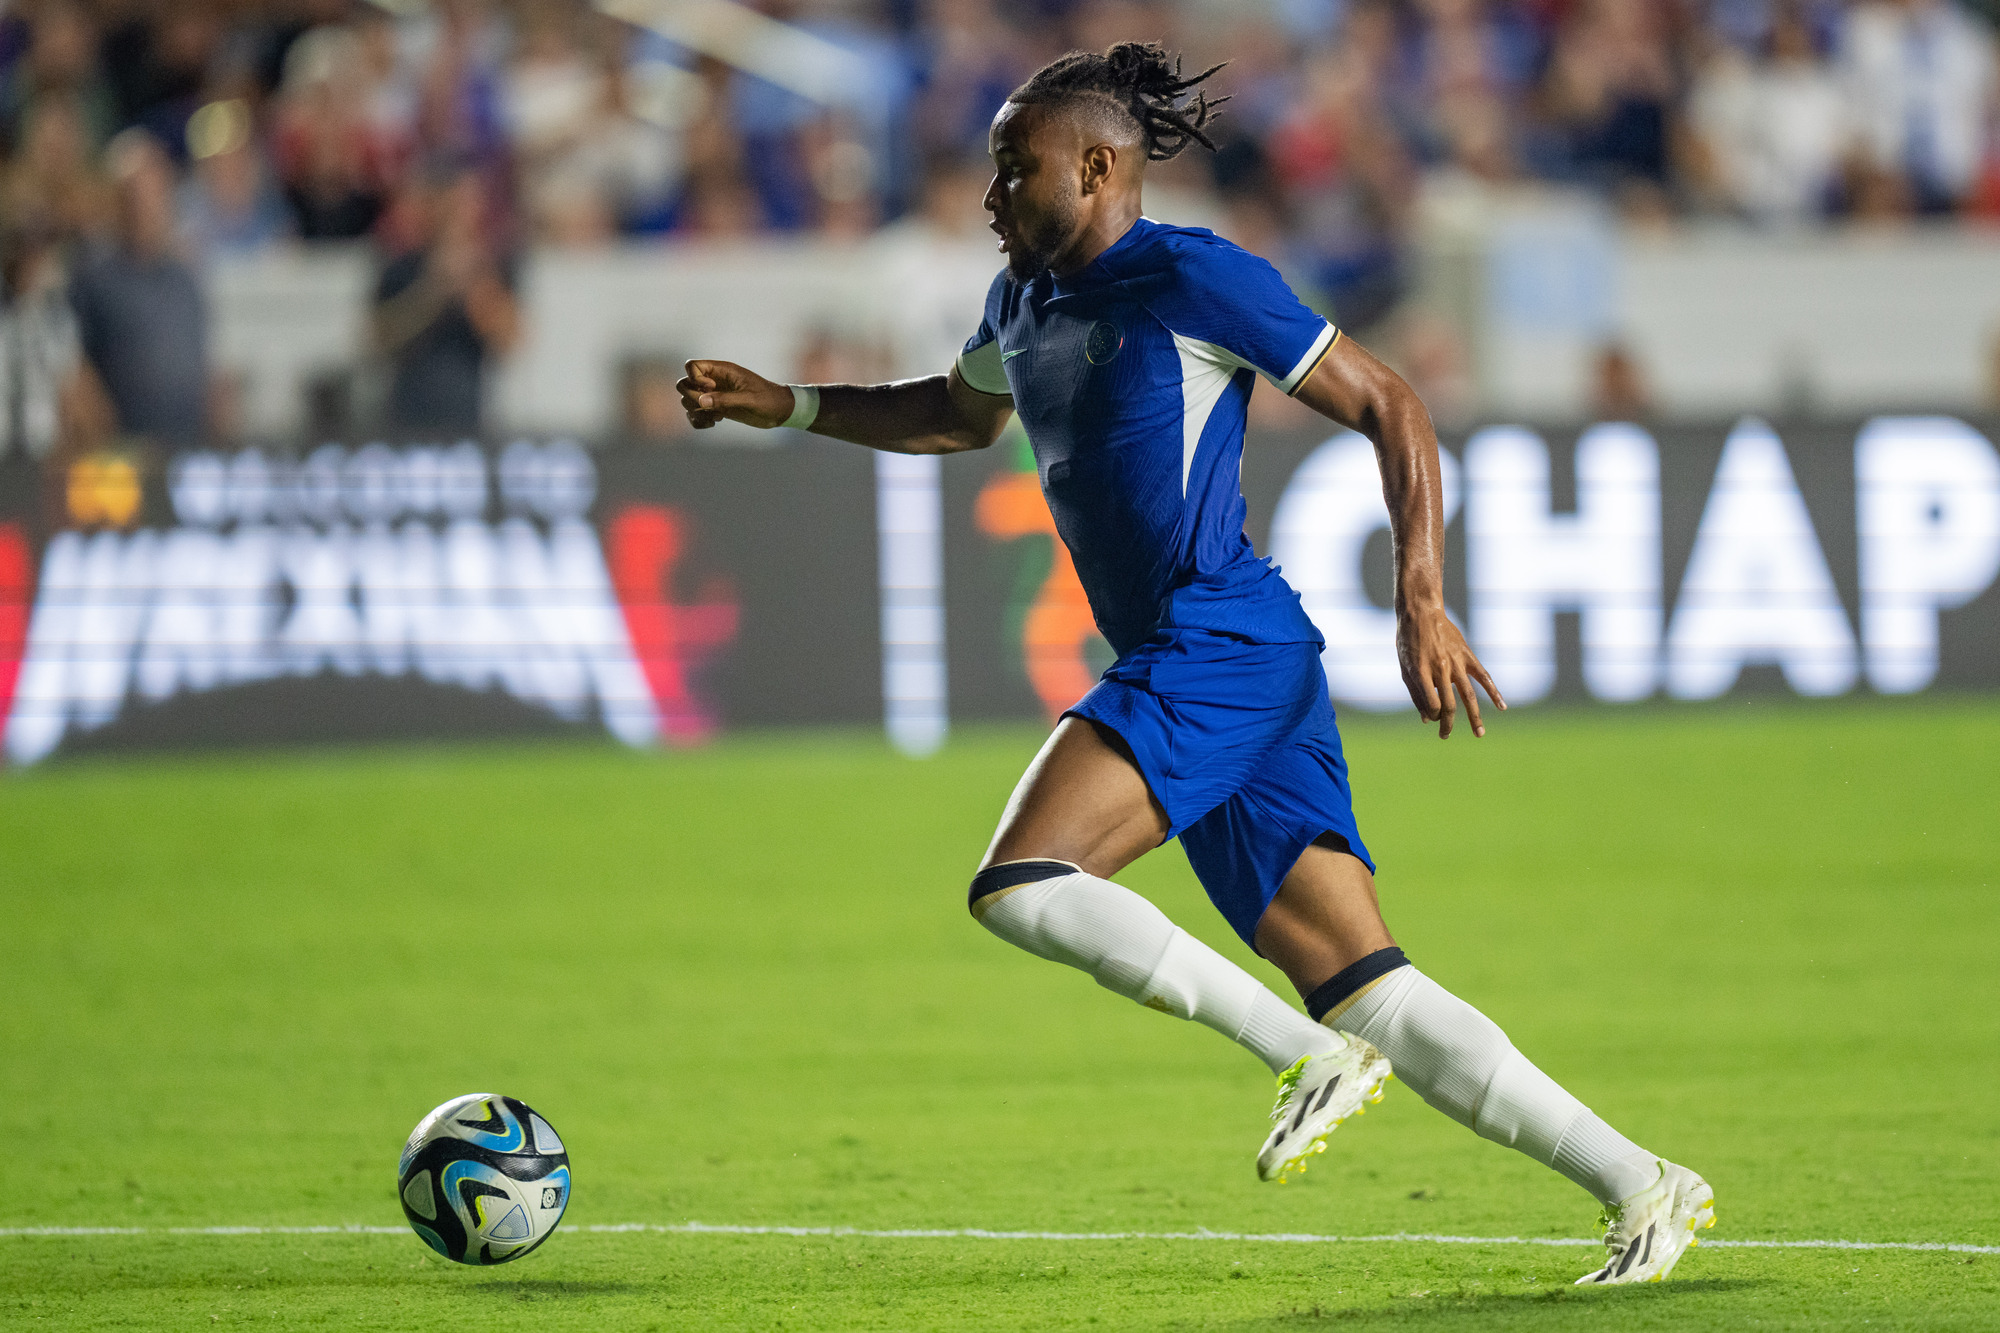 Ed Hodge, the personal trainer of Trevoh Chalobah brands the Chelsea injury situation a mess.